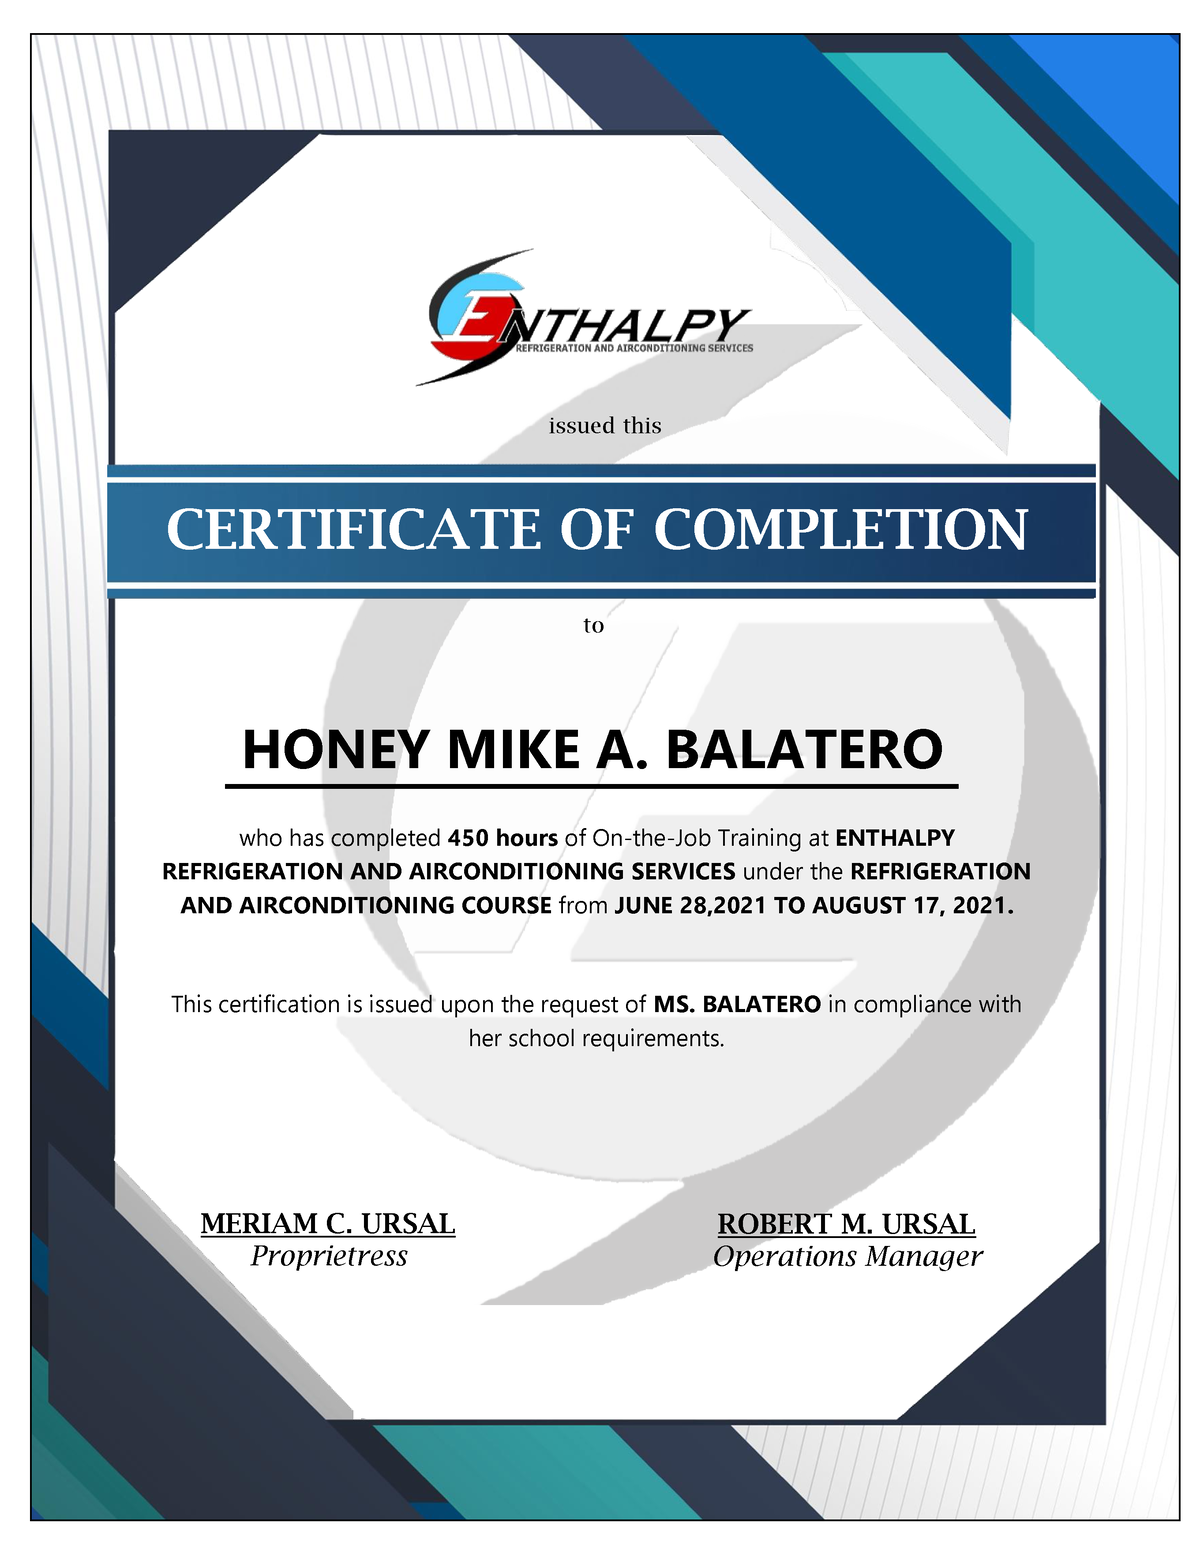 ojt-certification-2nd-batch-certificate-of-completion-who-has